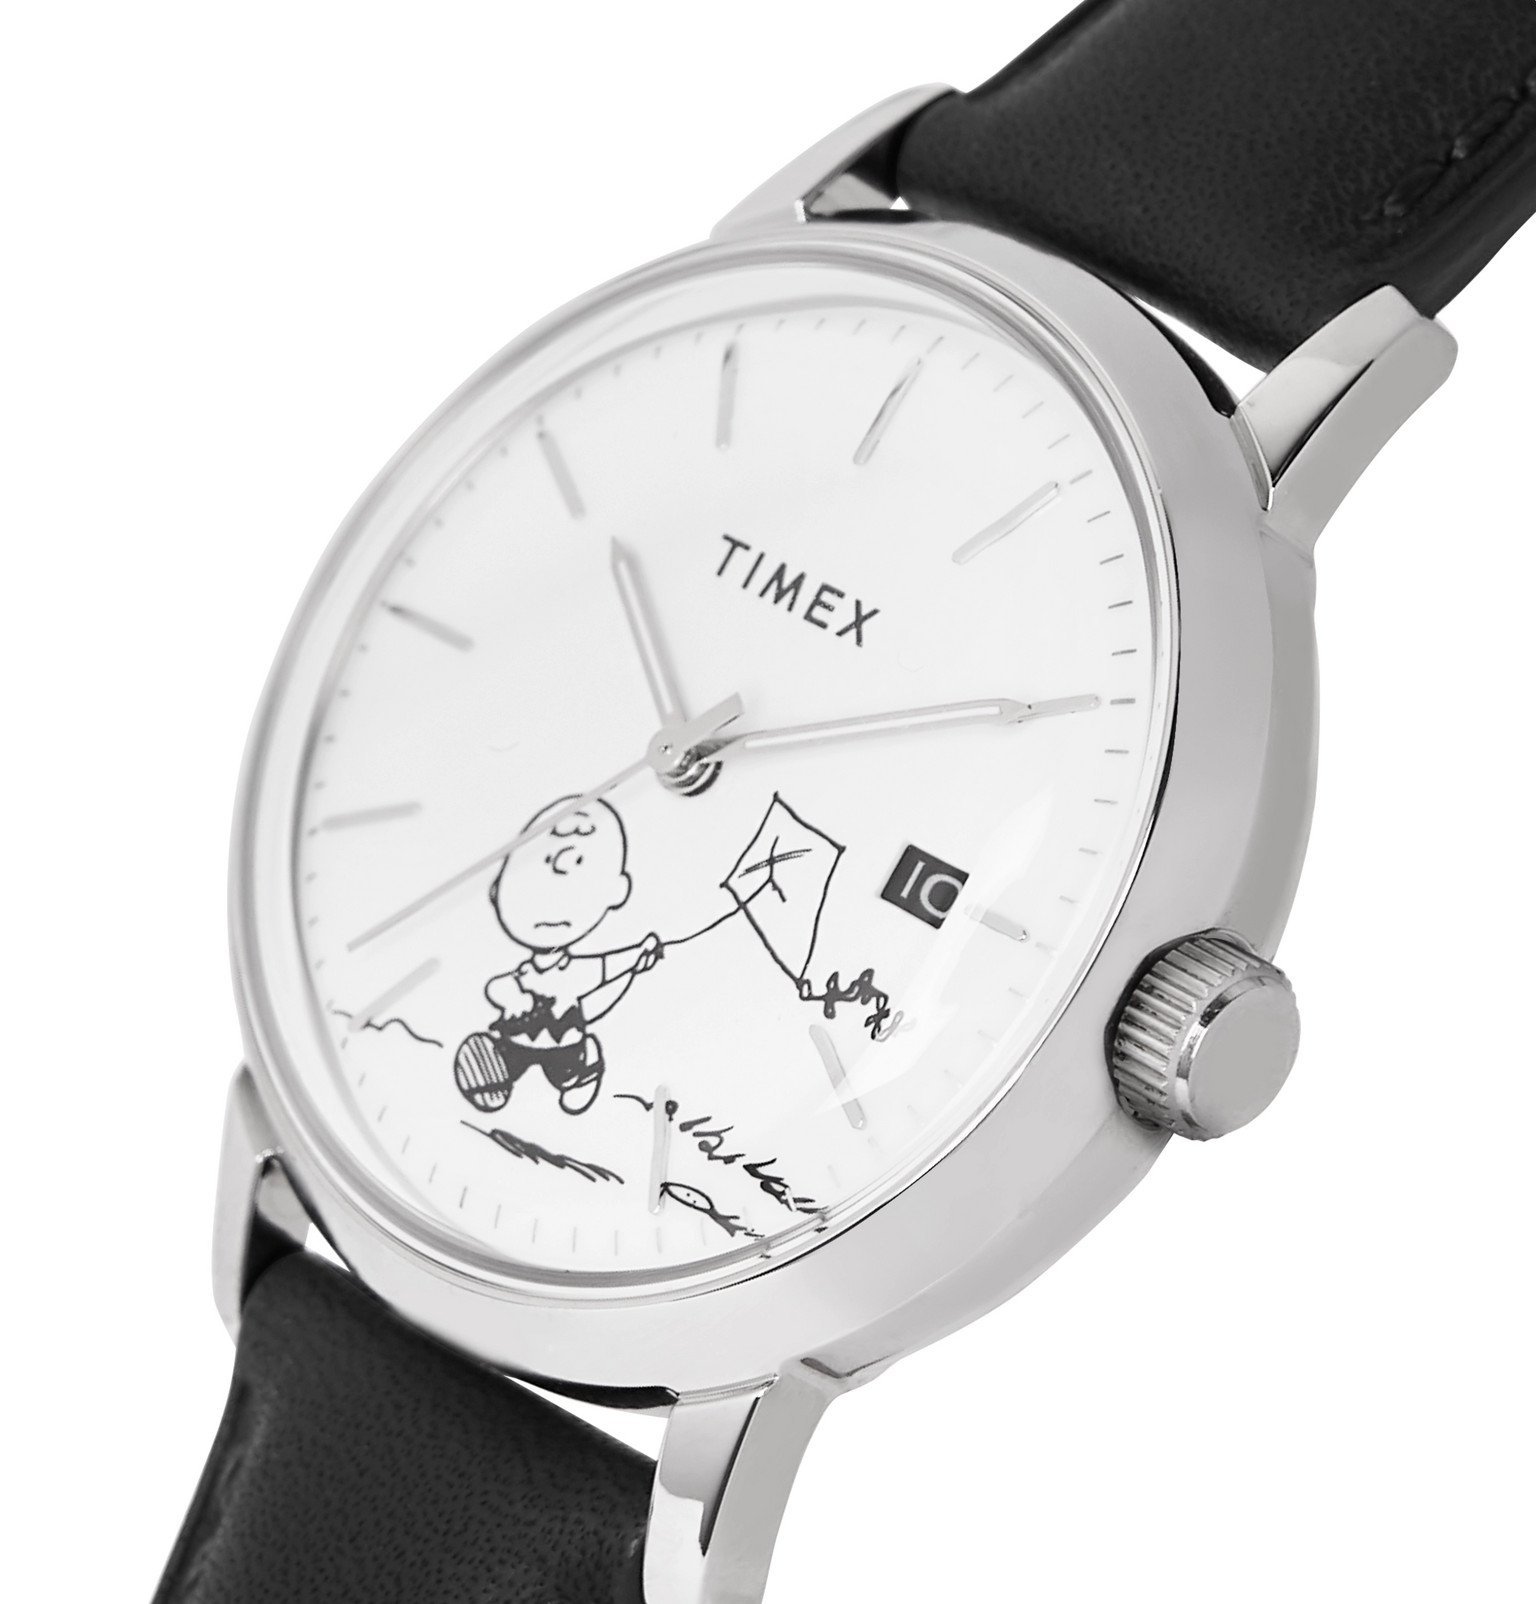 Timex - Peanuts Marlin Stainless Steel and Leather Watch - White Timex